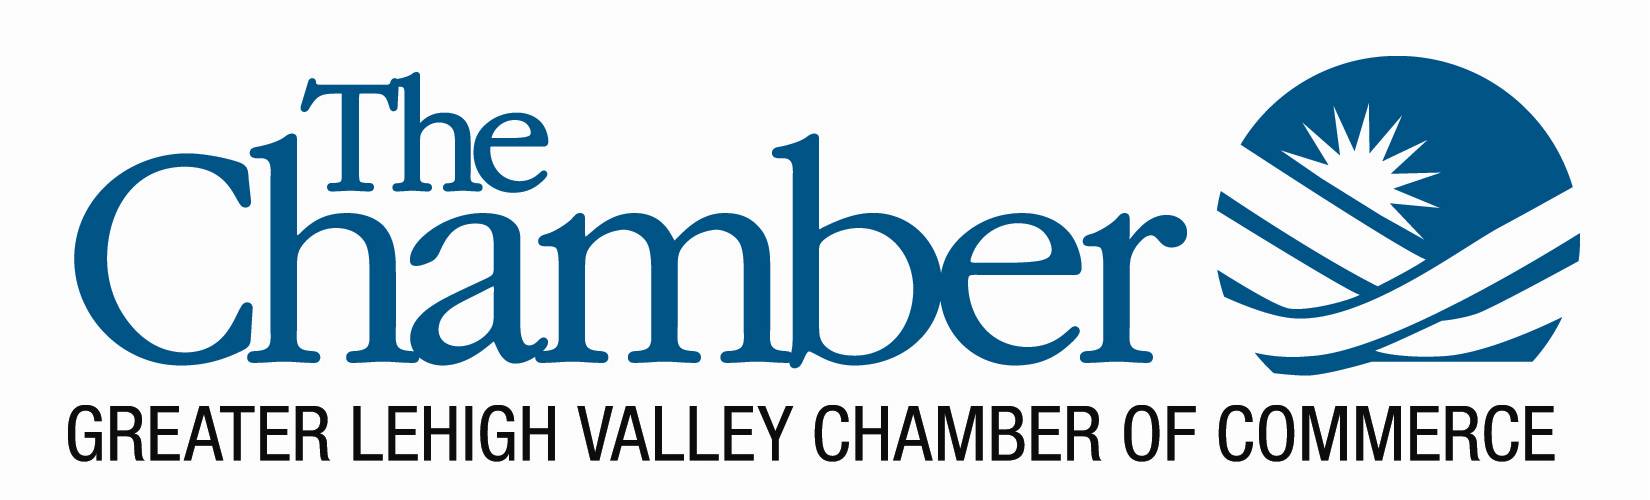 The Greater Lehigh Valley Chamber of Commerce logo